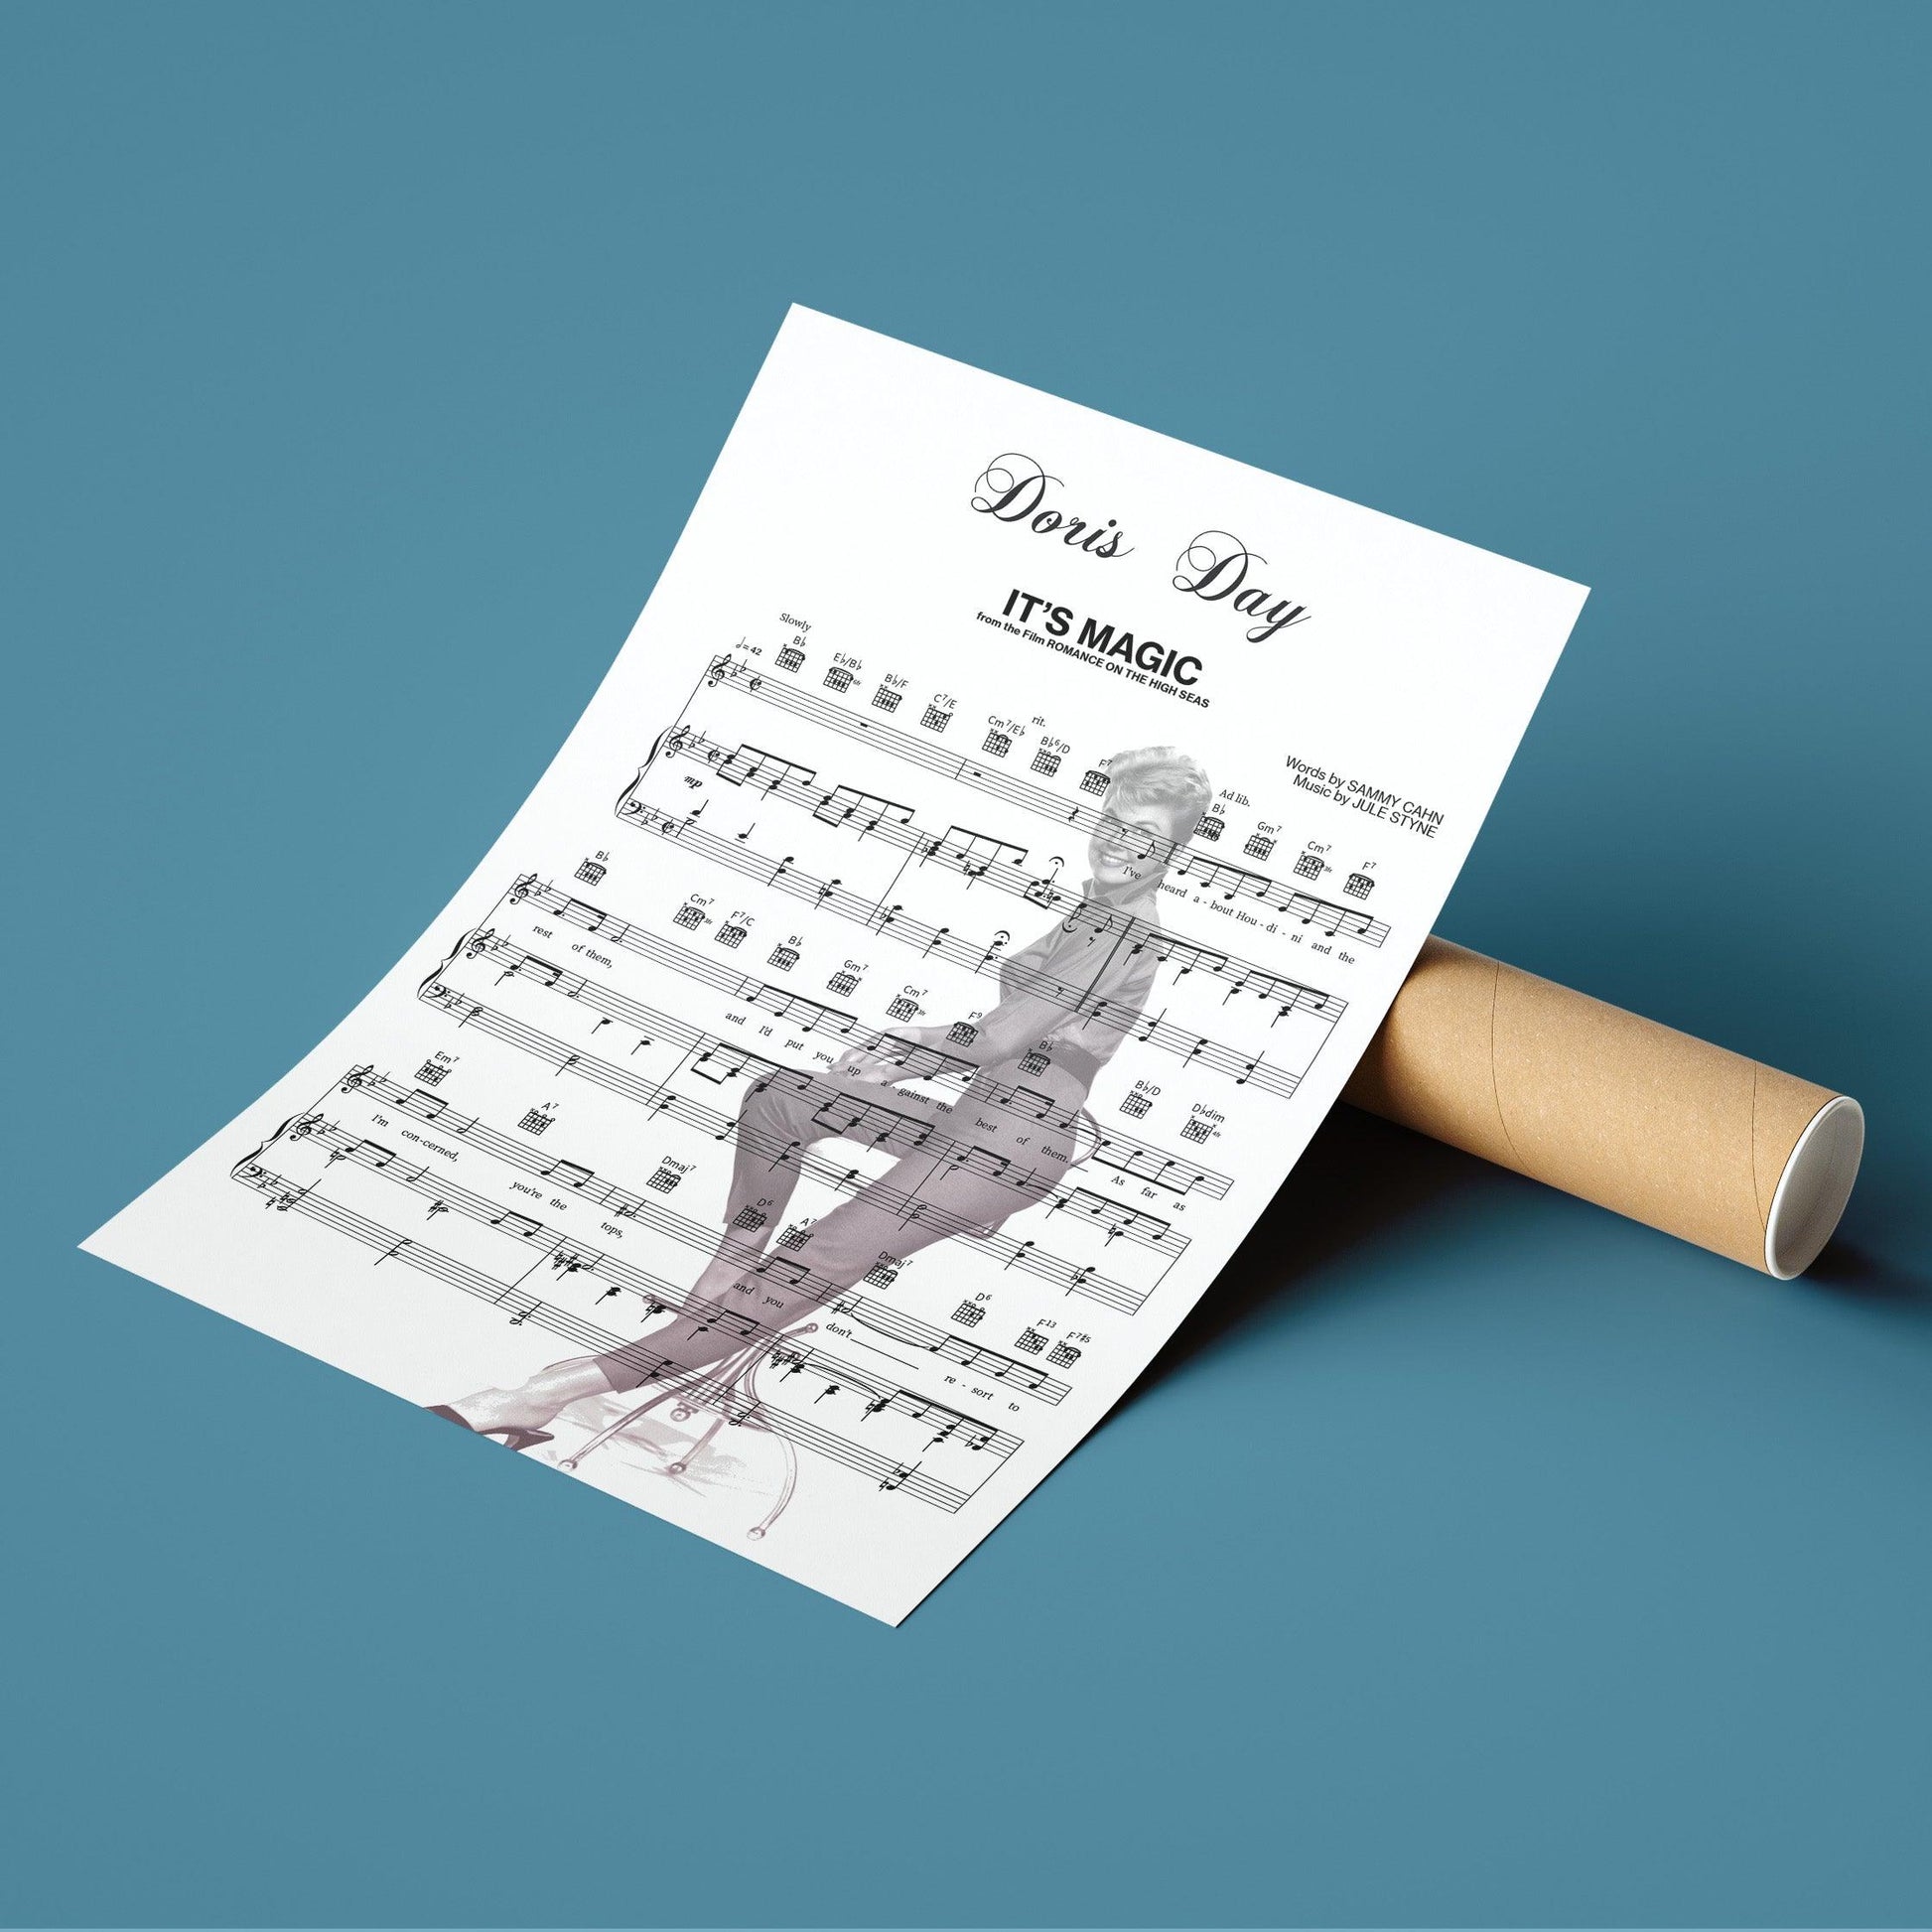 Doris Day - It's Magic Song Print | Song Music Sheet Notes Print Everyone has a favorite song especially Doris Day Print, and now you can show the score as printed staff. The personal favorite song sheet print shows the song chosen as the score. 